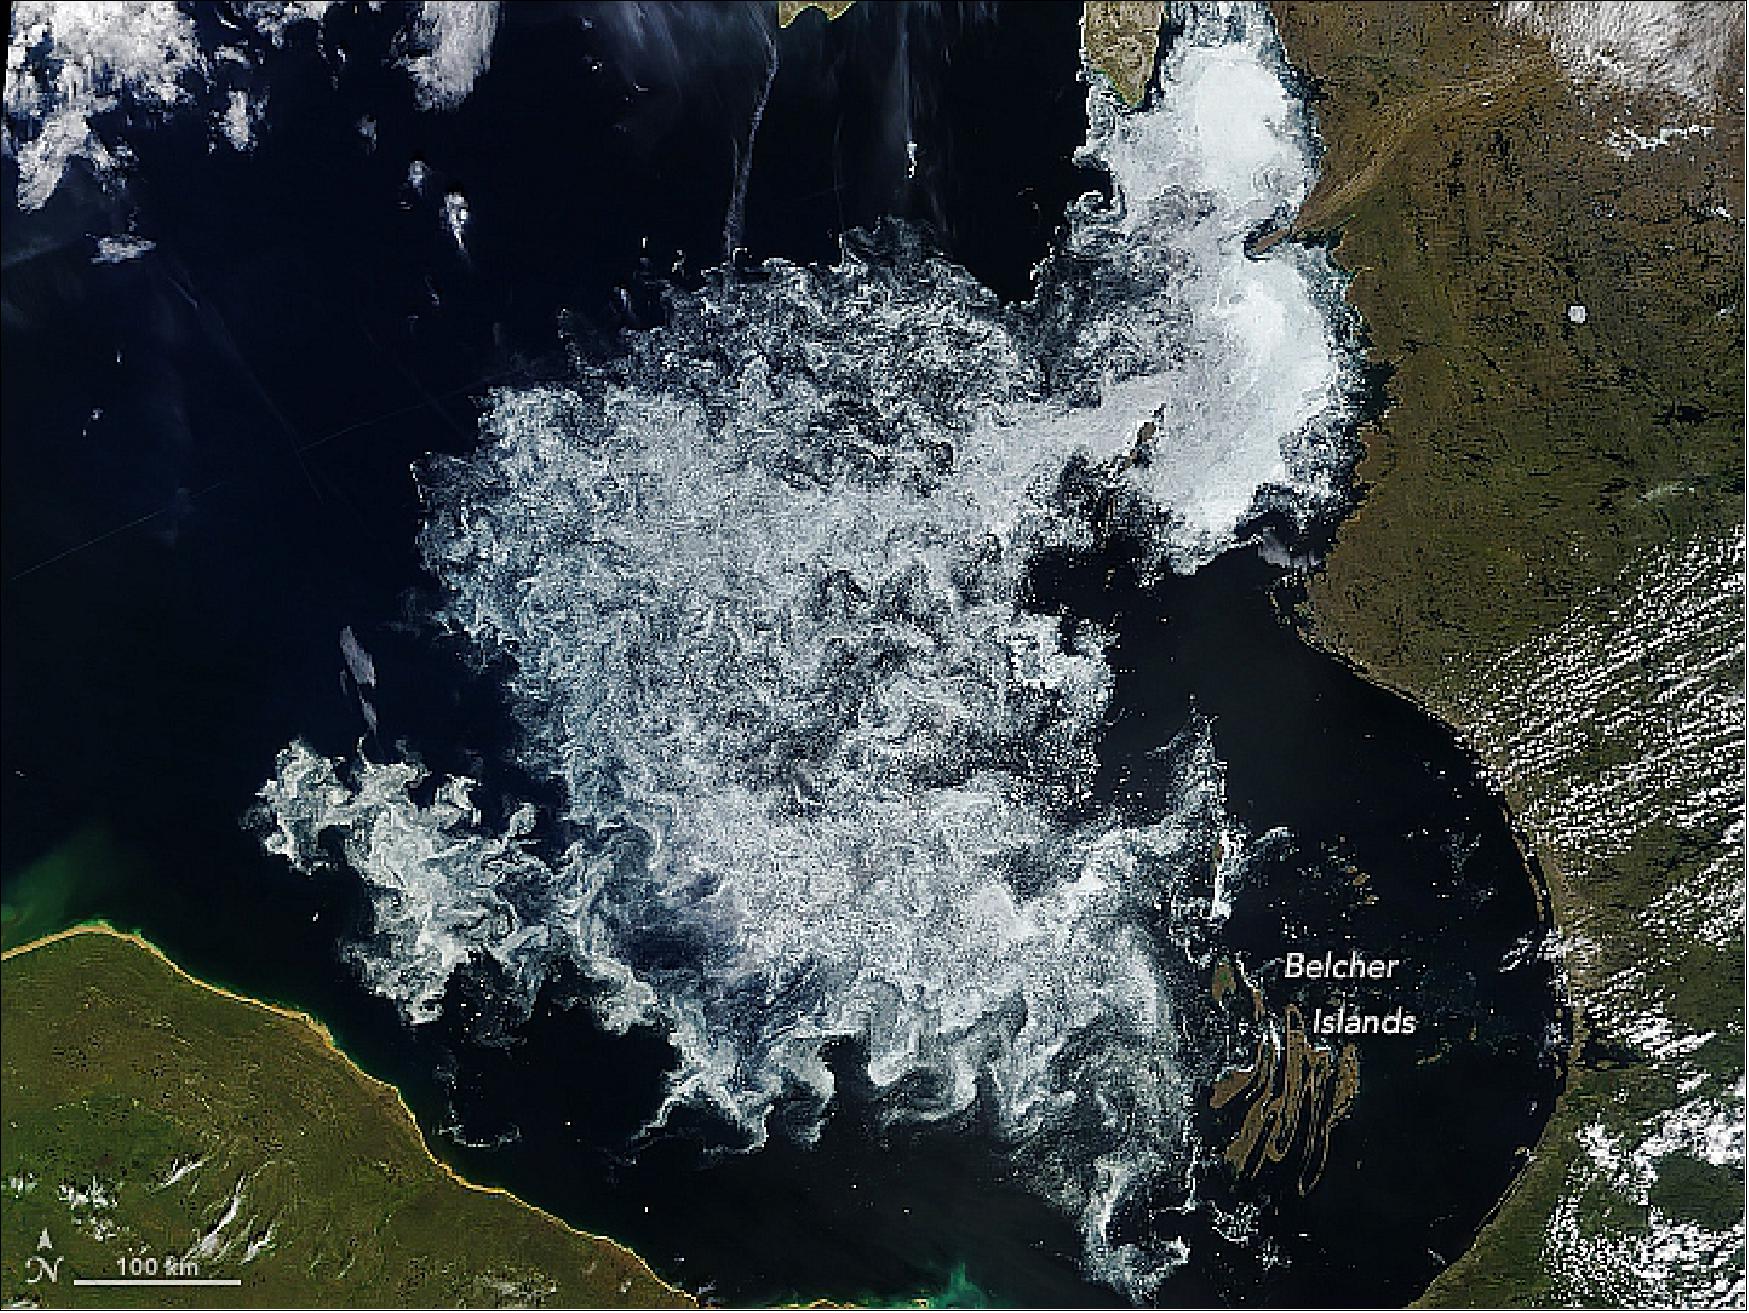 Figure 66: Sea ice can linger on Hudson Bay into the summer, but it is usually gone by mid-August (image credit: NASA Earth Observatory, image by Joshua Stevens, using MODIS data from LANCE/EOSDIS Rapid Response, story by Adam Voiland)